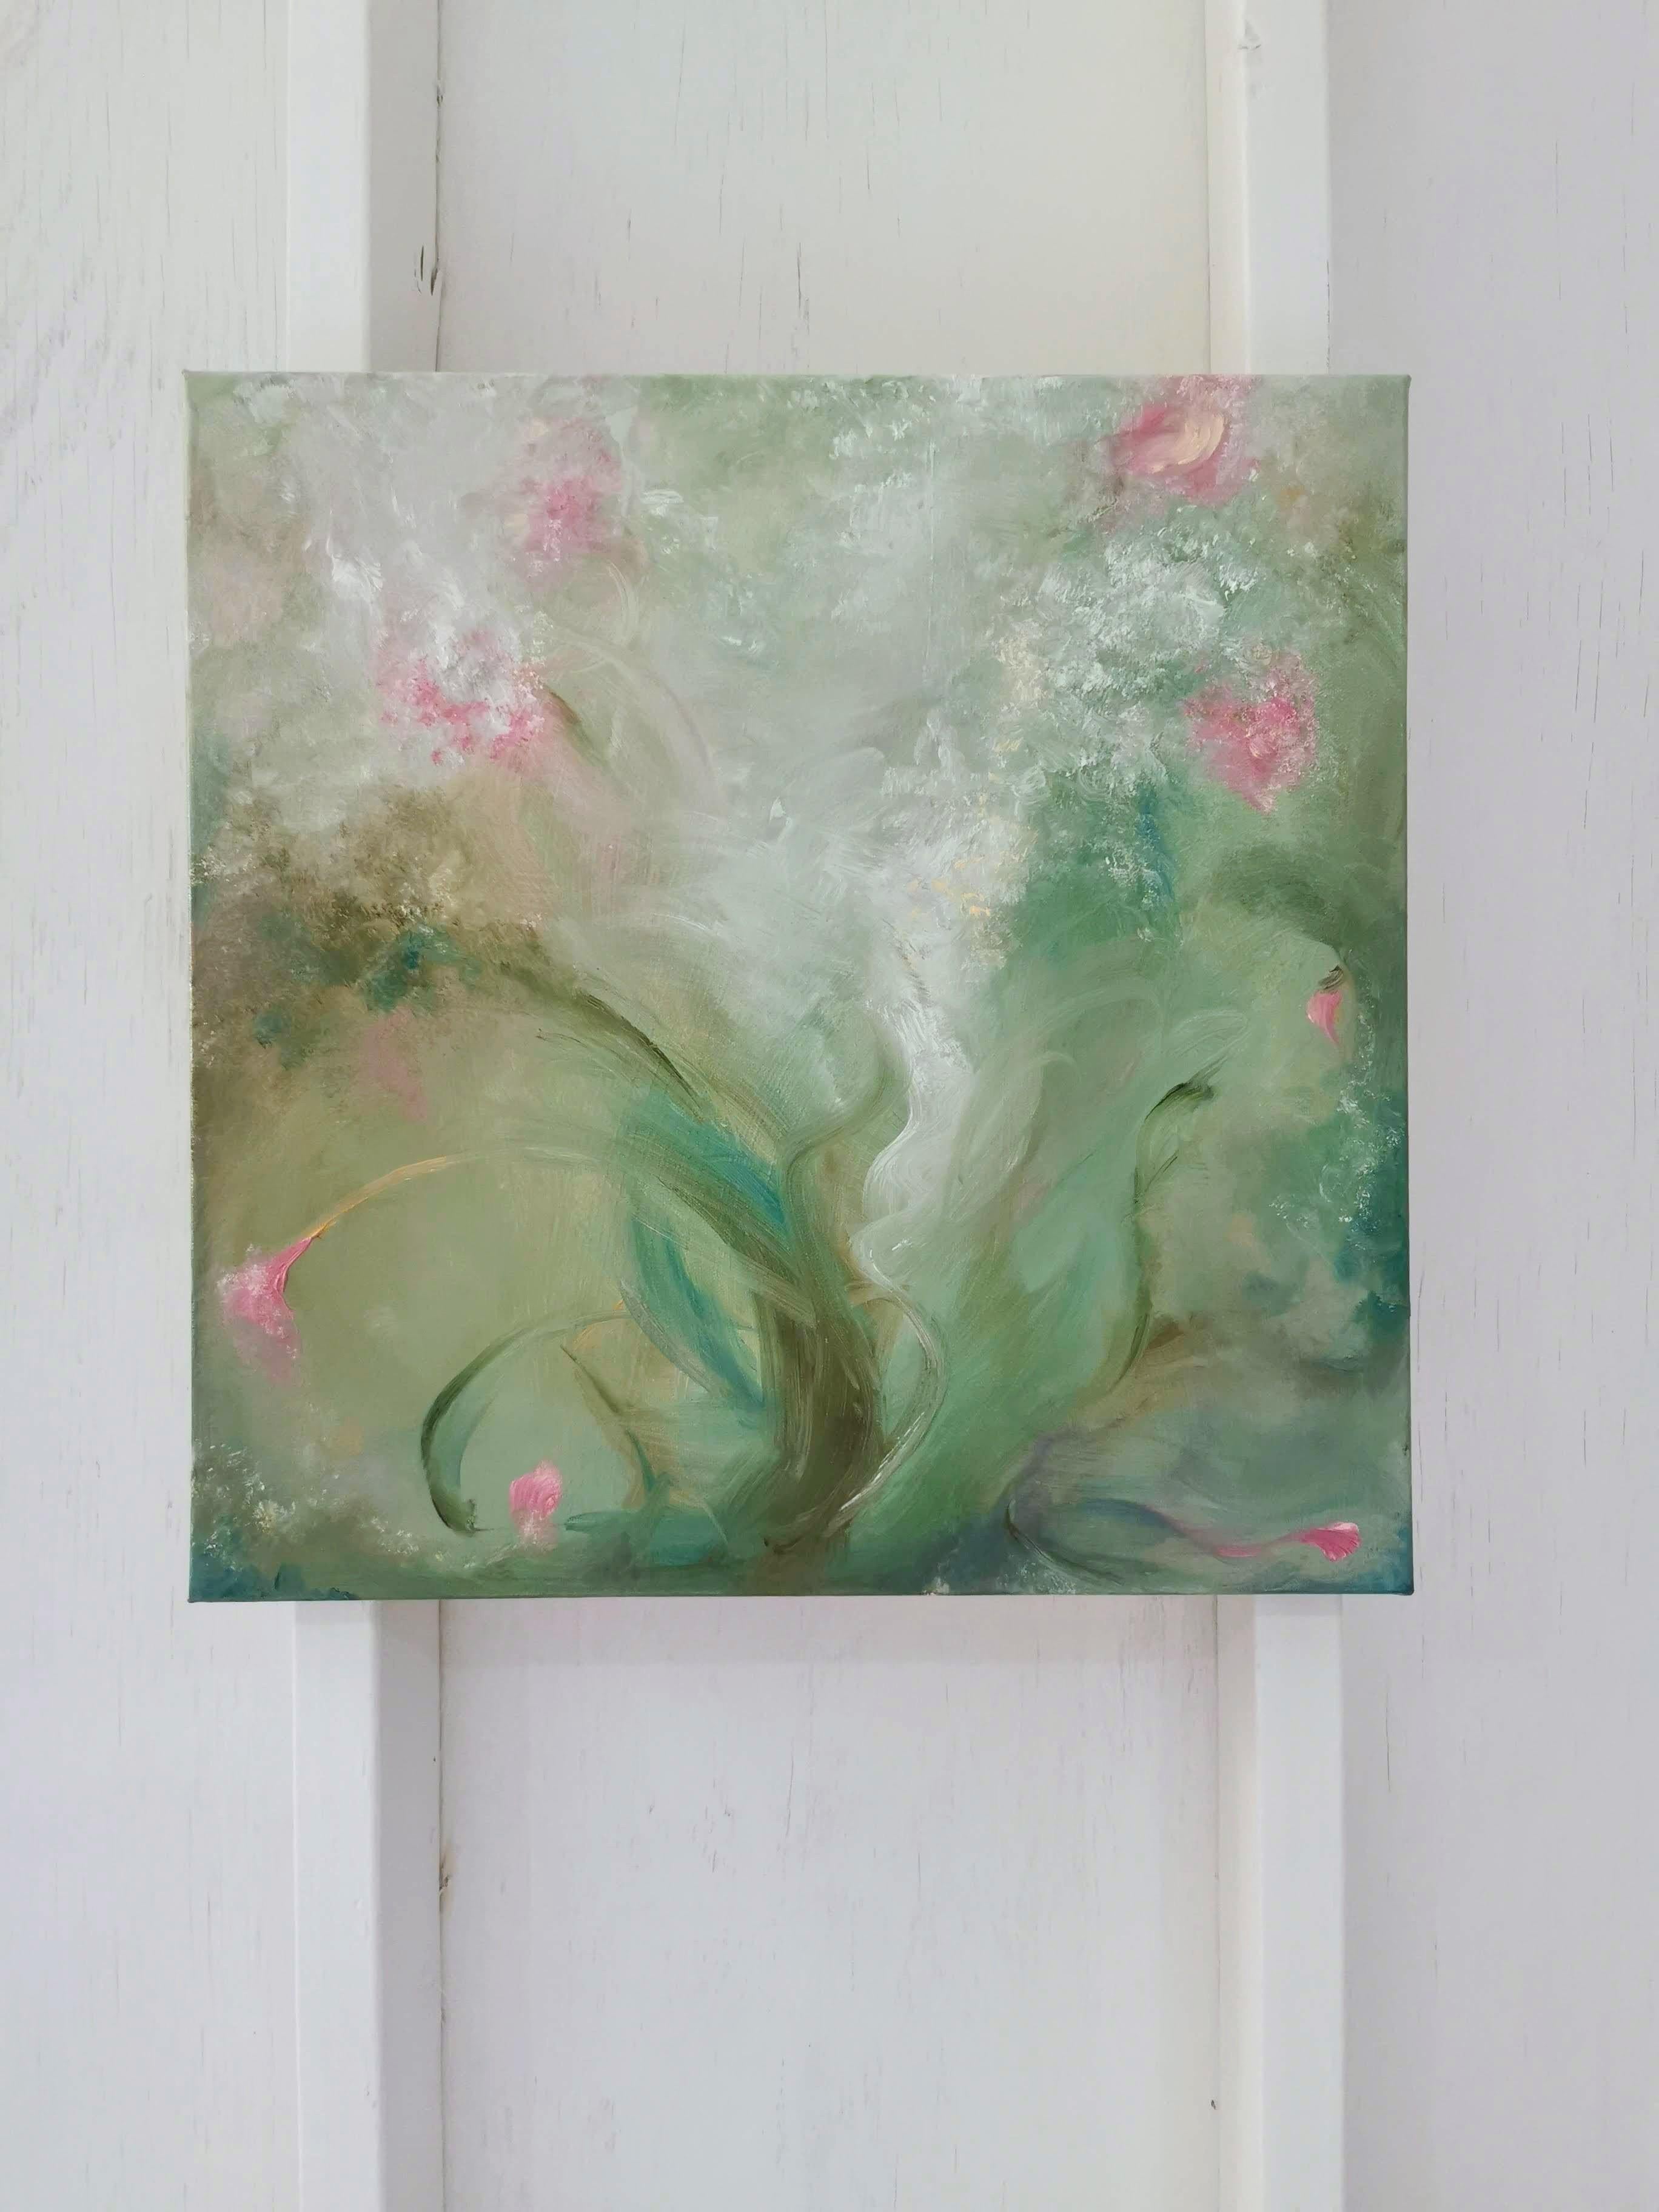 A most verdant spring - Whimsical green and pink abstract painting - Painting by Jennifer L. Baker